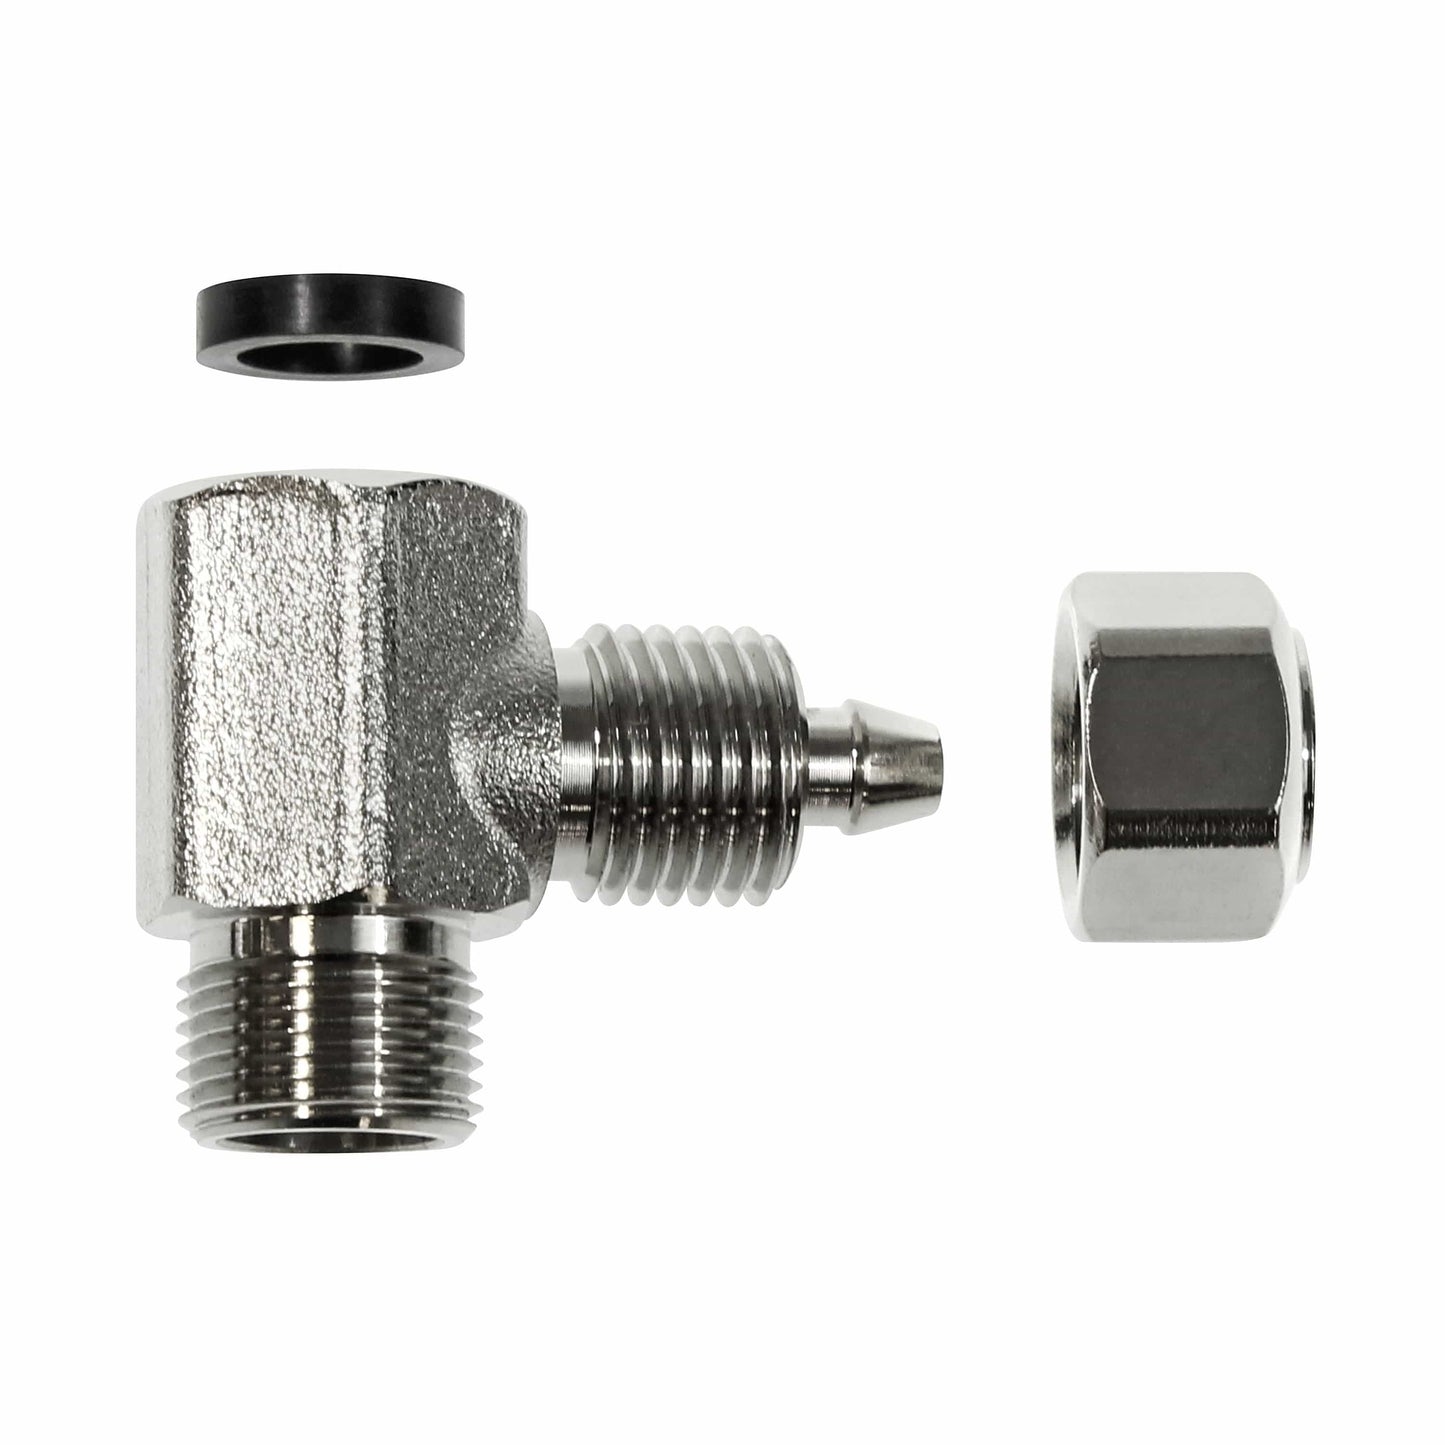 3/8” Hot Water Metal T-Adapter with washer and nut depicted